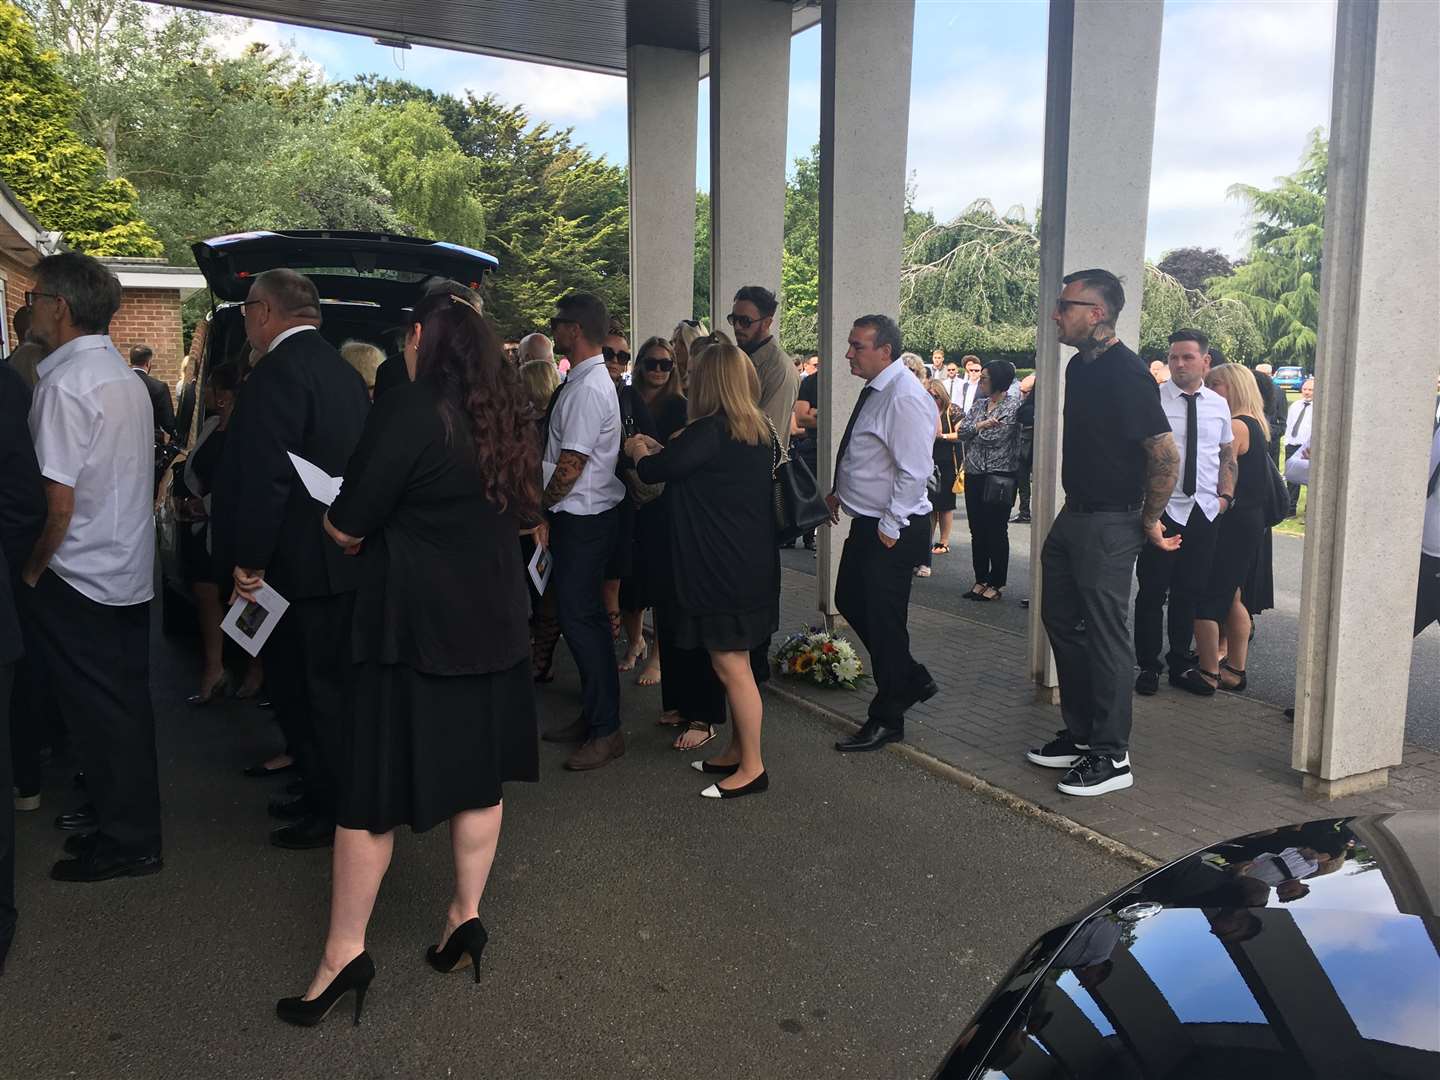 Ben Stone's funeral in July, which brought in hundreds of mourners